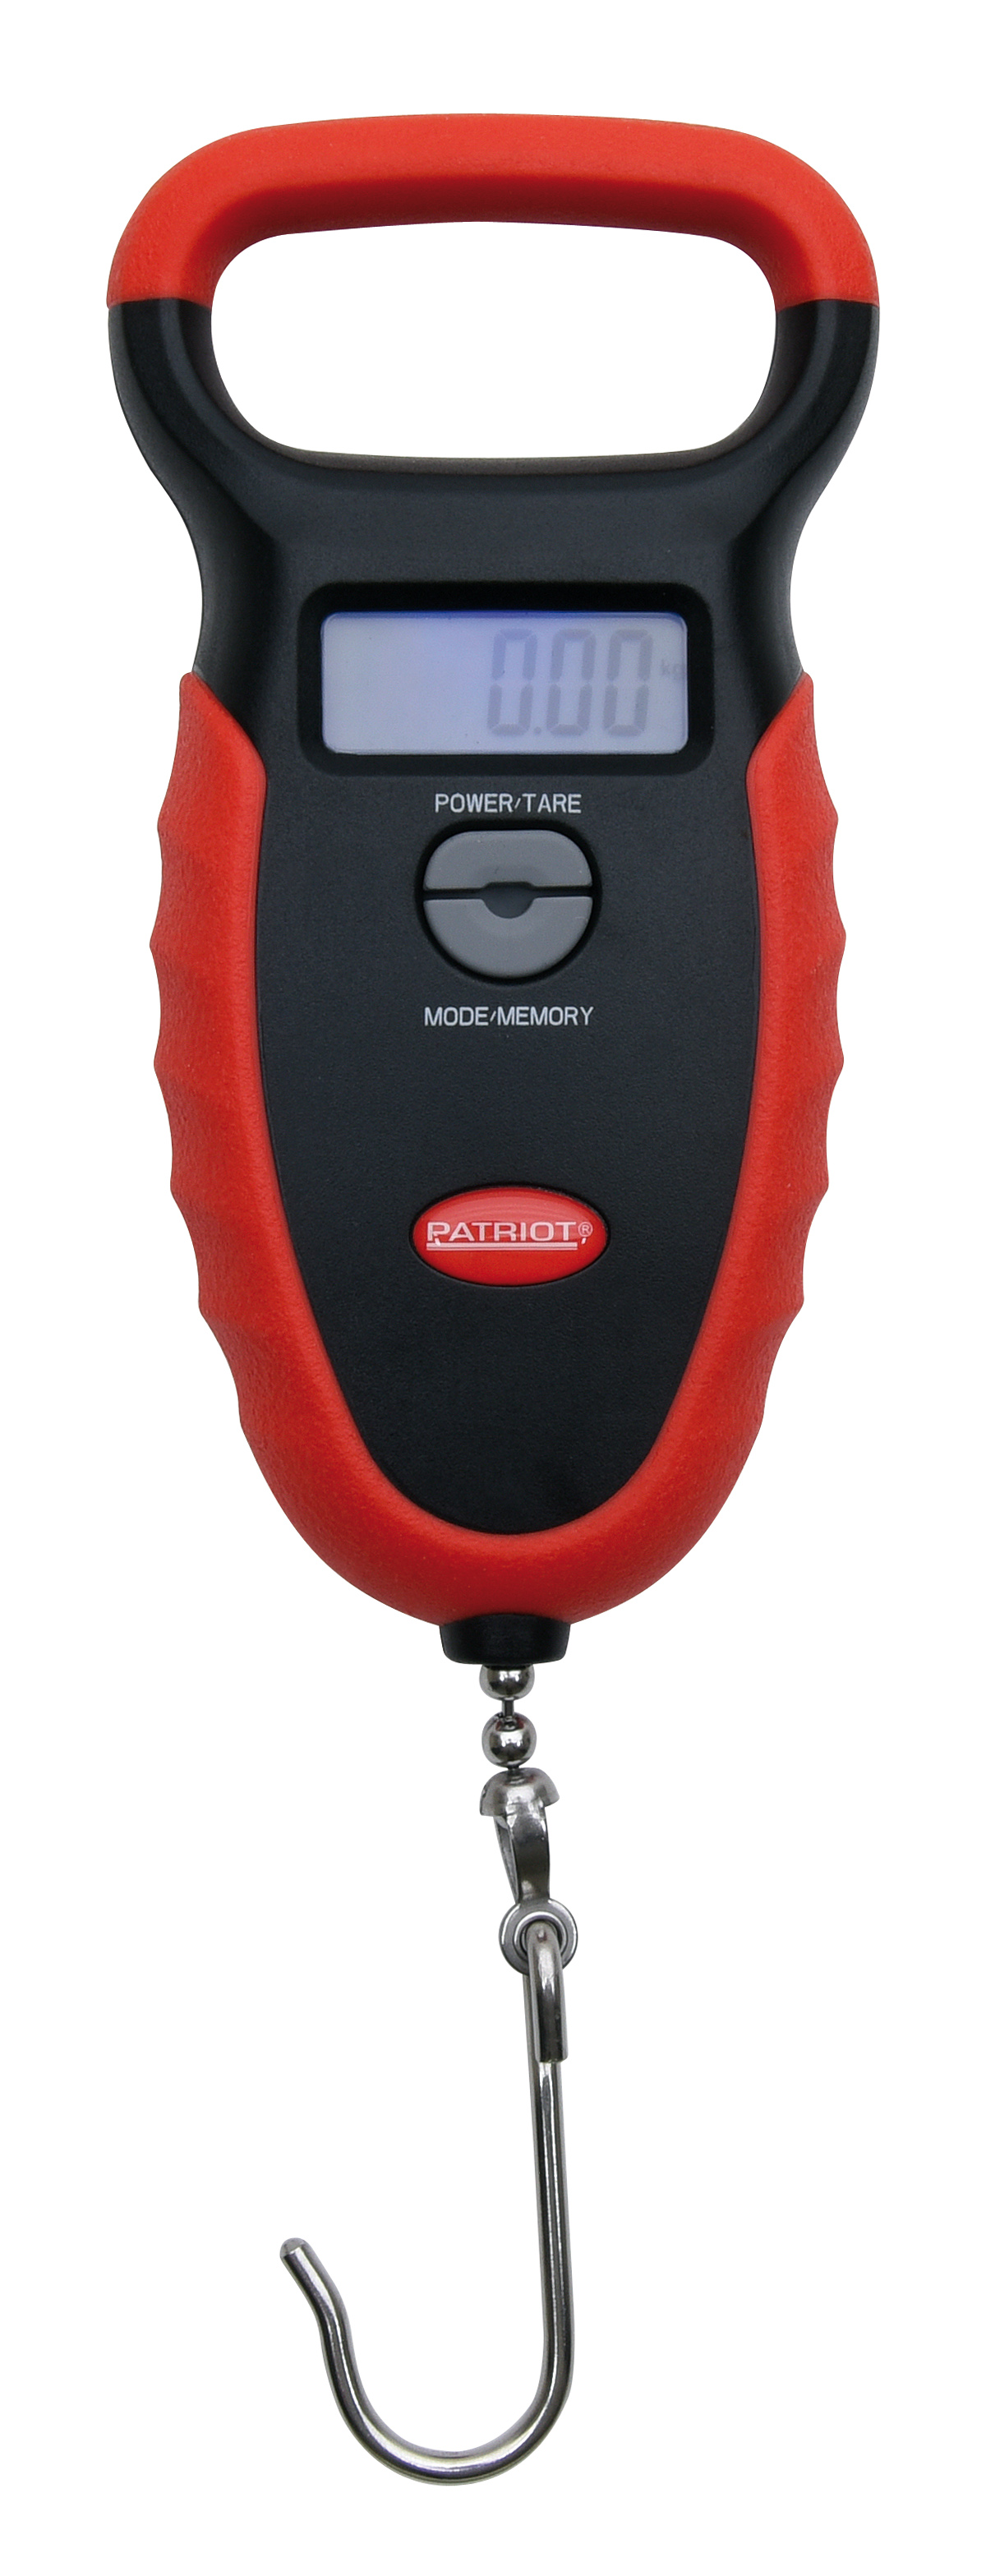 Buy Digital Fishing Weight Scales Red 25kg/55lb online at